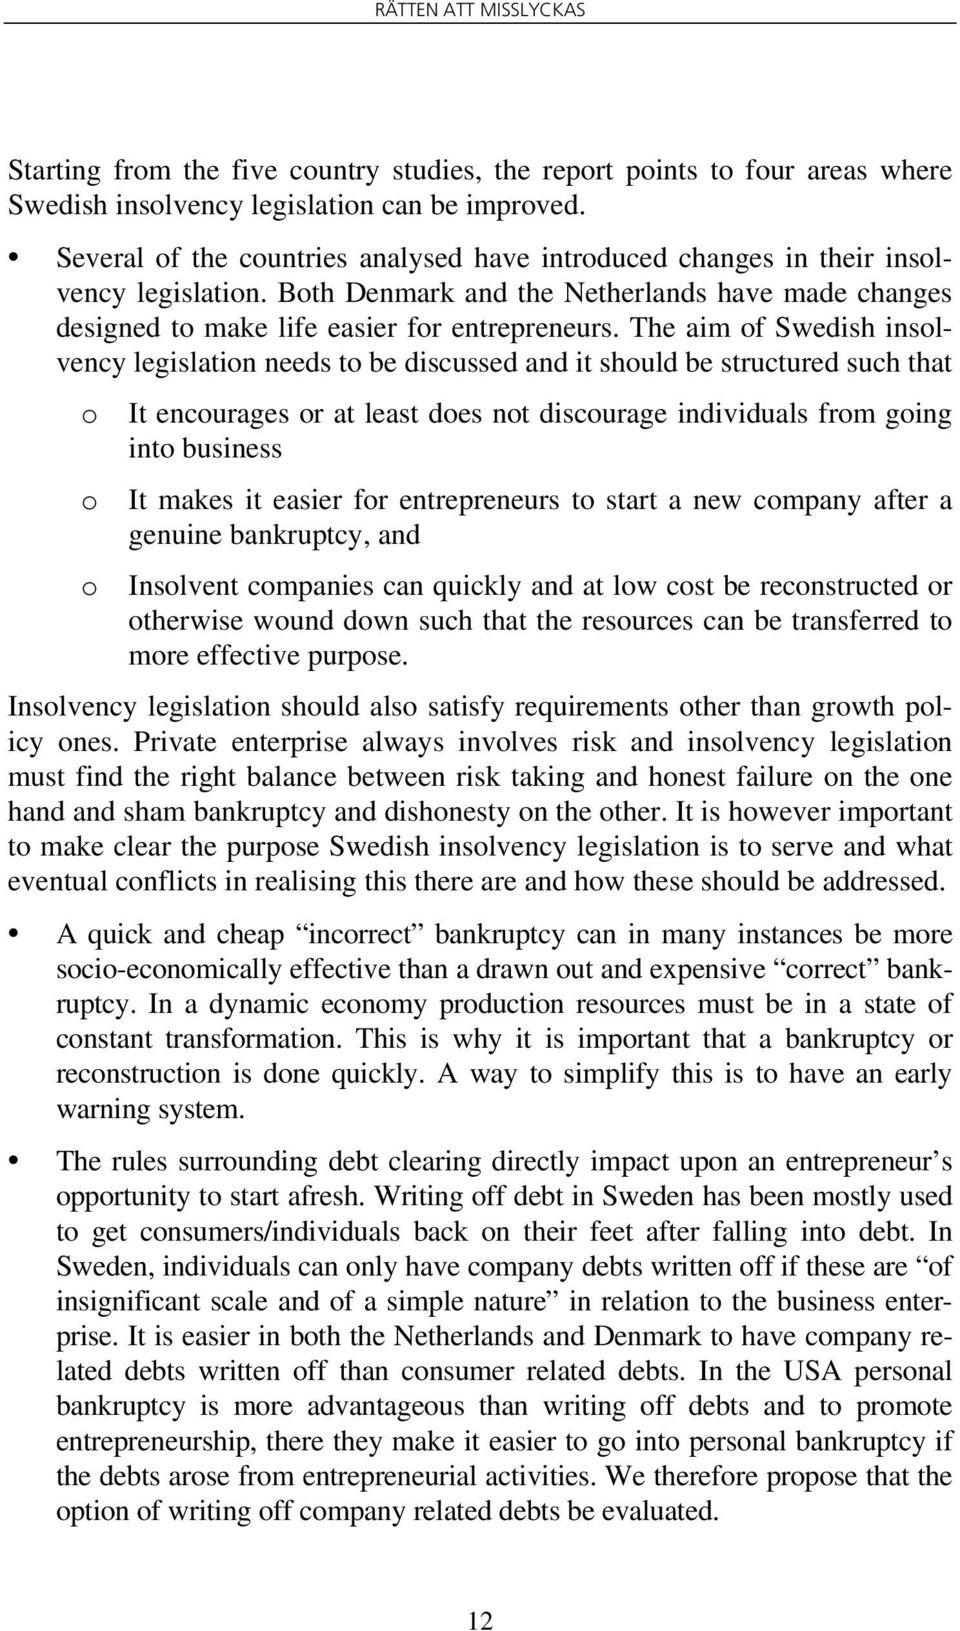 The aim of Swedish insolvency legislation needs to be discussed and it should be structured such that o o o It encourages or at least does not discourage individuals from going into business It makes